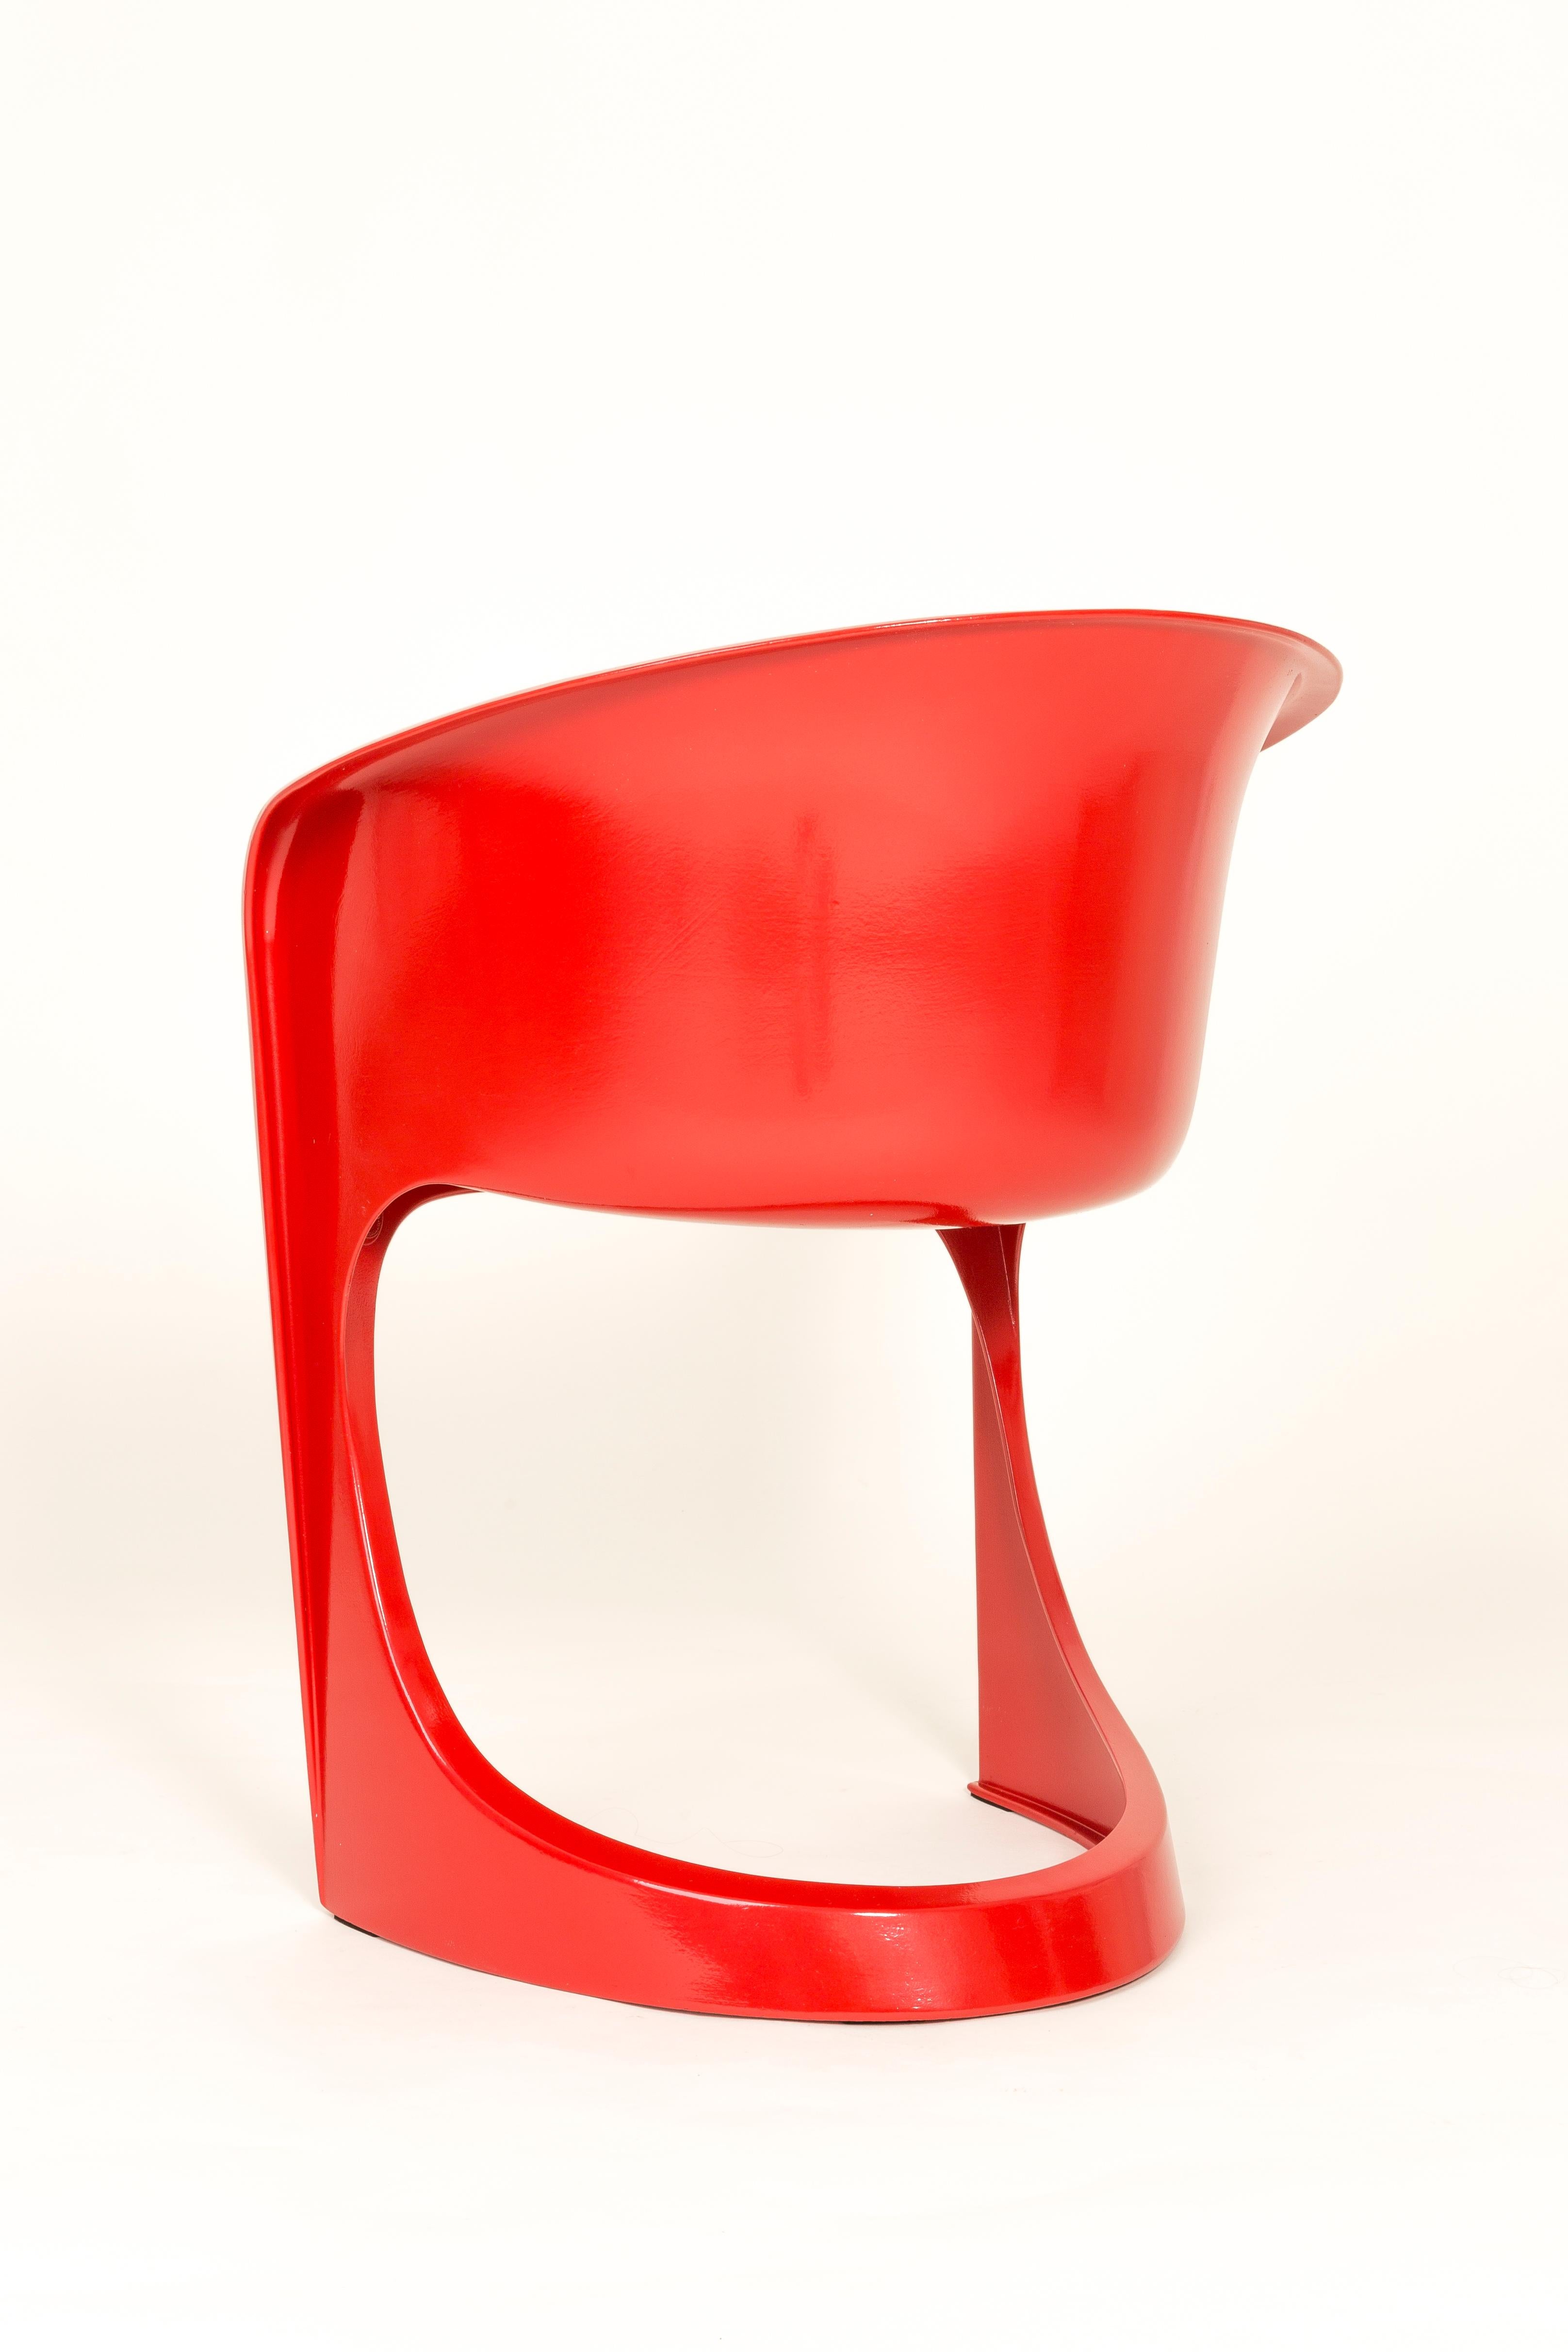 Polish Mid Century Glossy Red Cado Chair, Steen Østergaard, 1974 For Sale